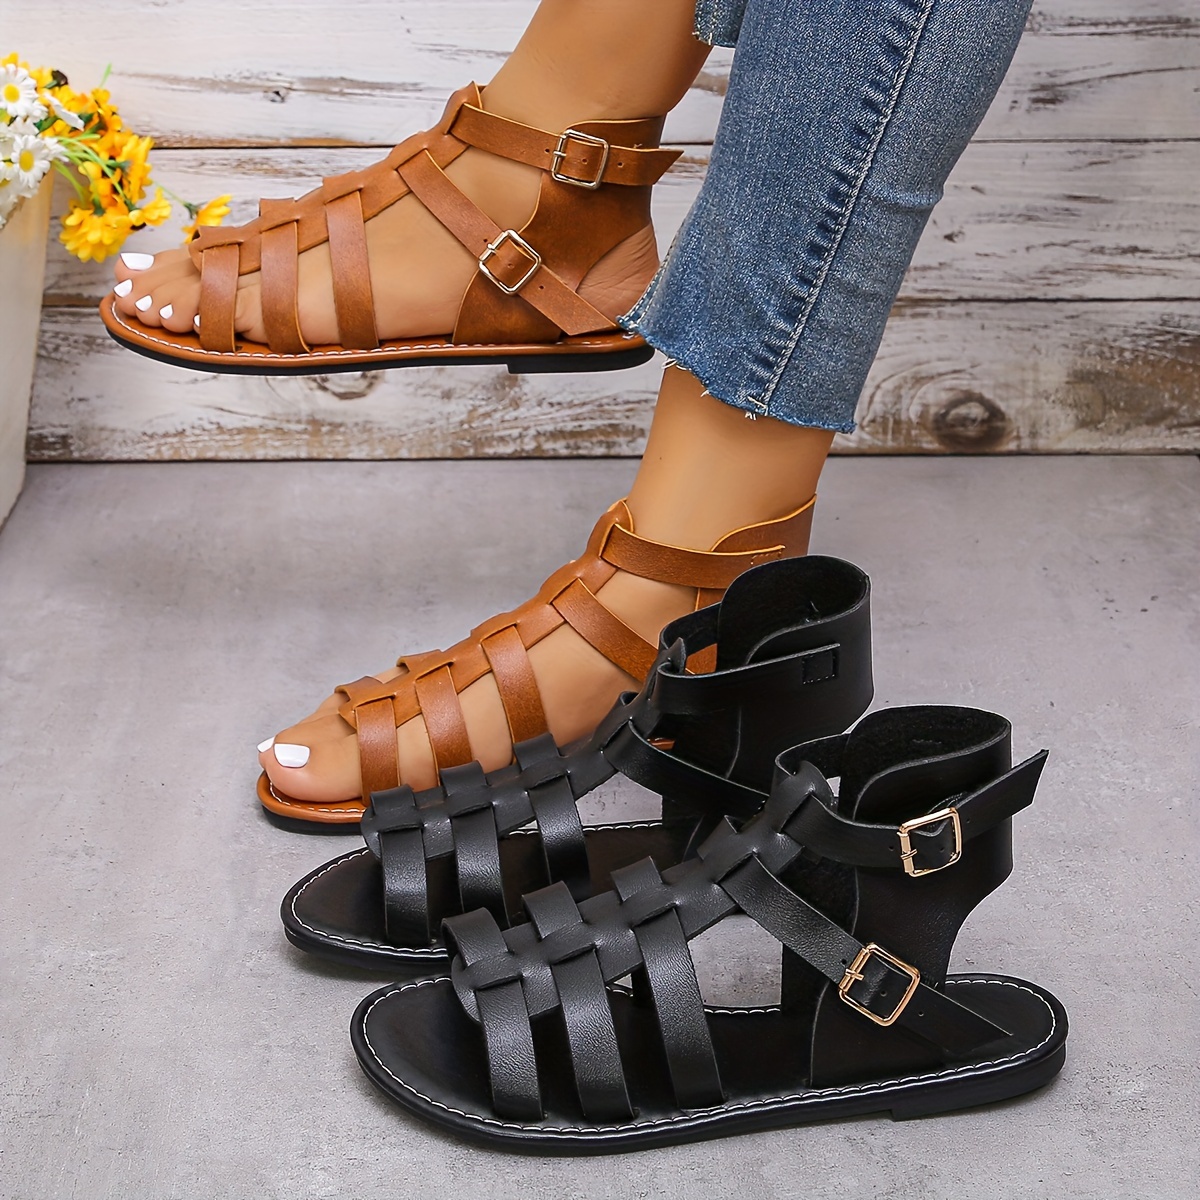 

Women's Fashion Solid Color Sandals, Strappy Buckle Flats, Summer Footwear For Casual Outfits